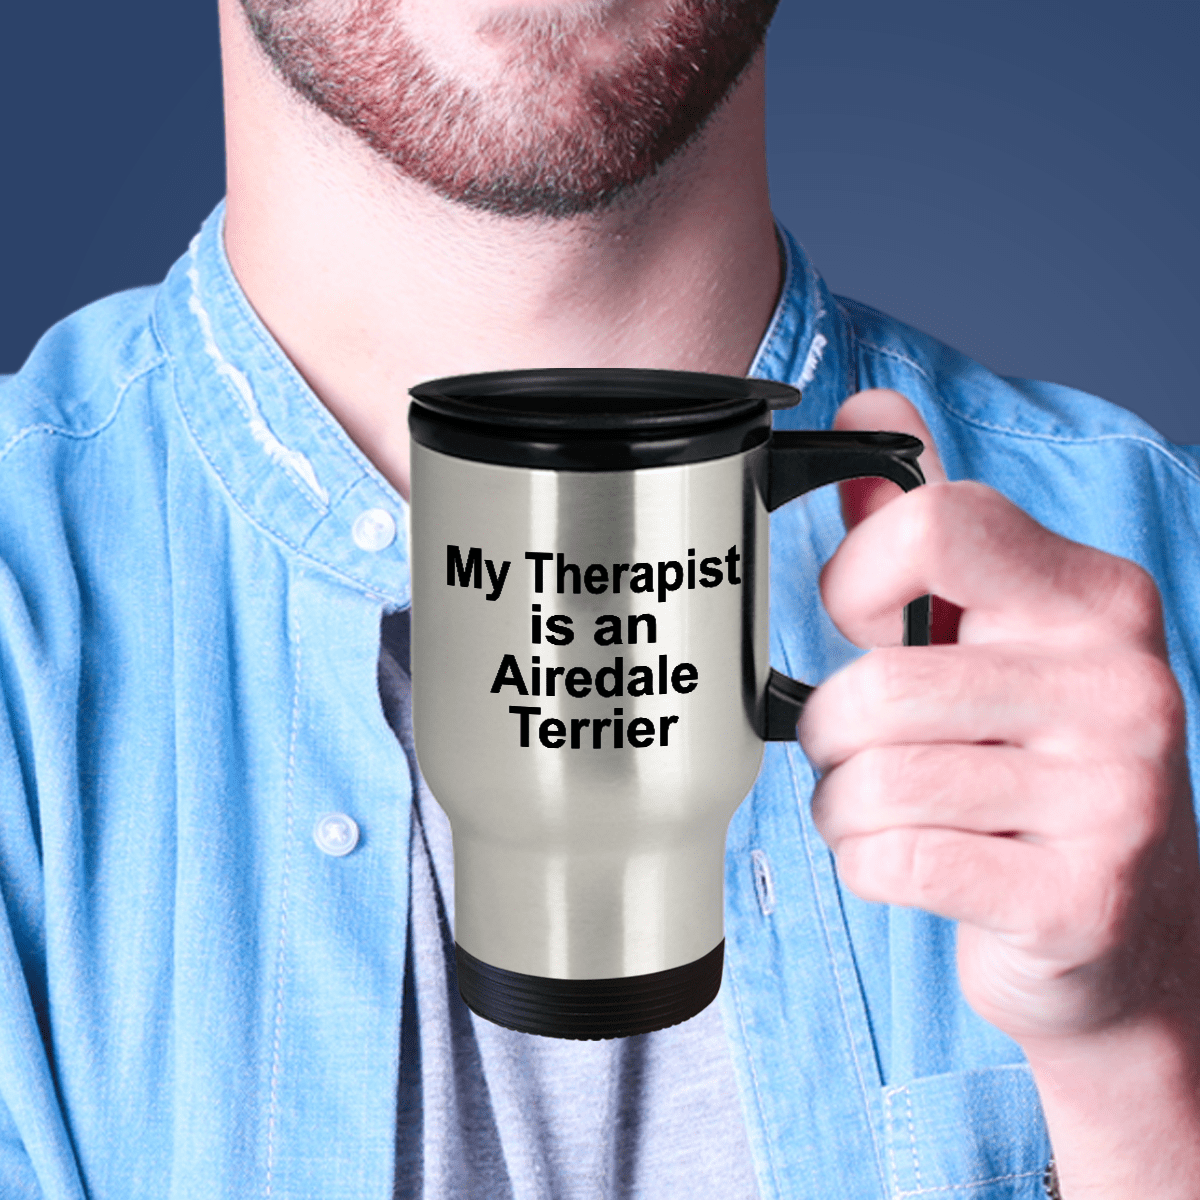 Airedale Terrier Dog Therapist  Travel Coffee Mug